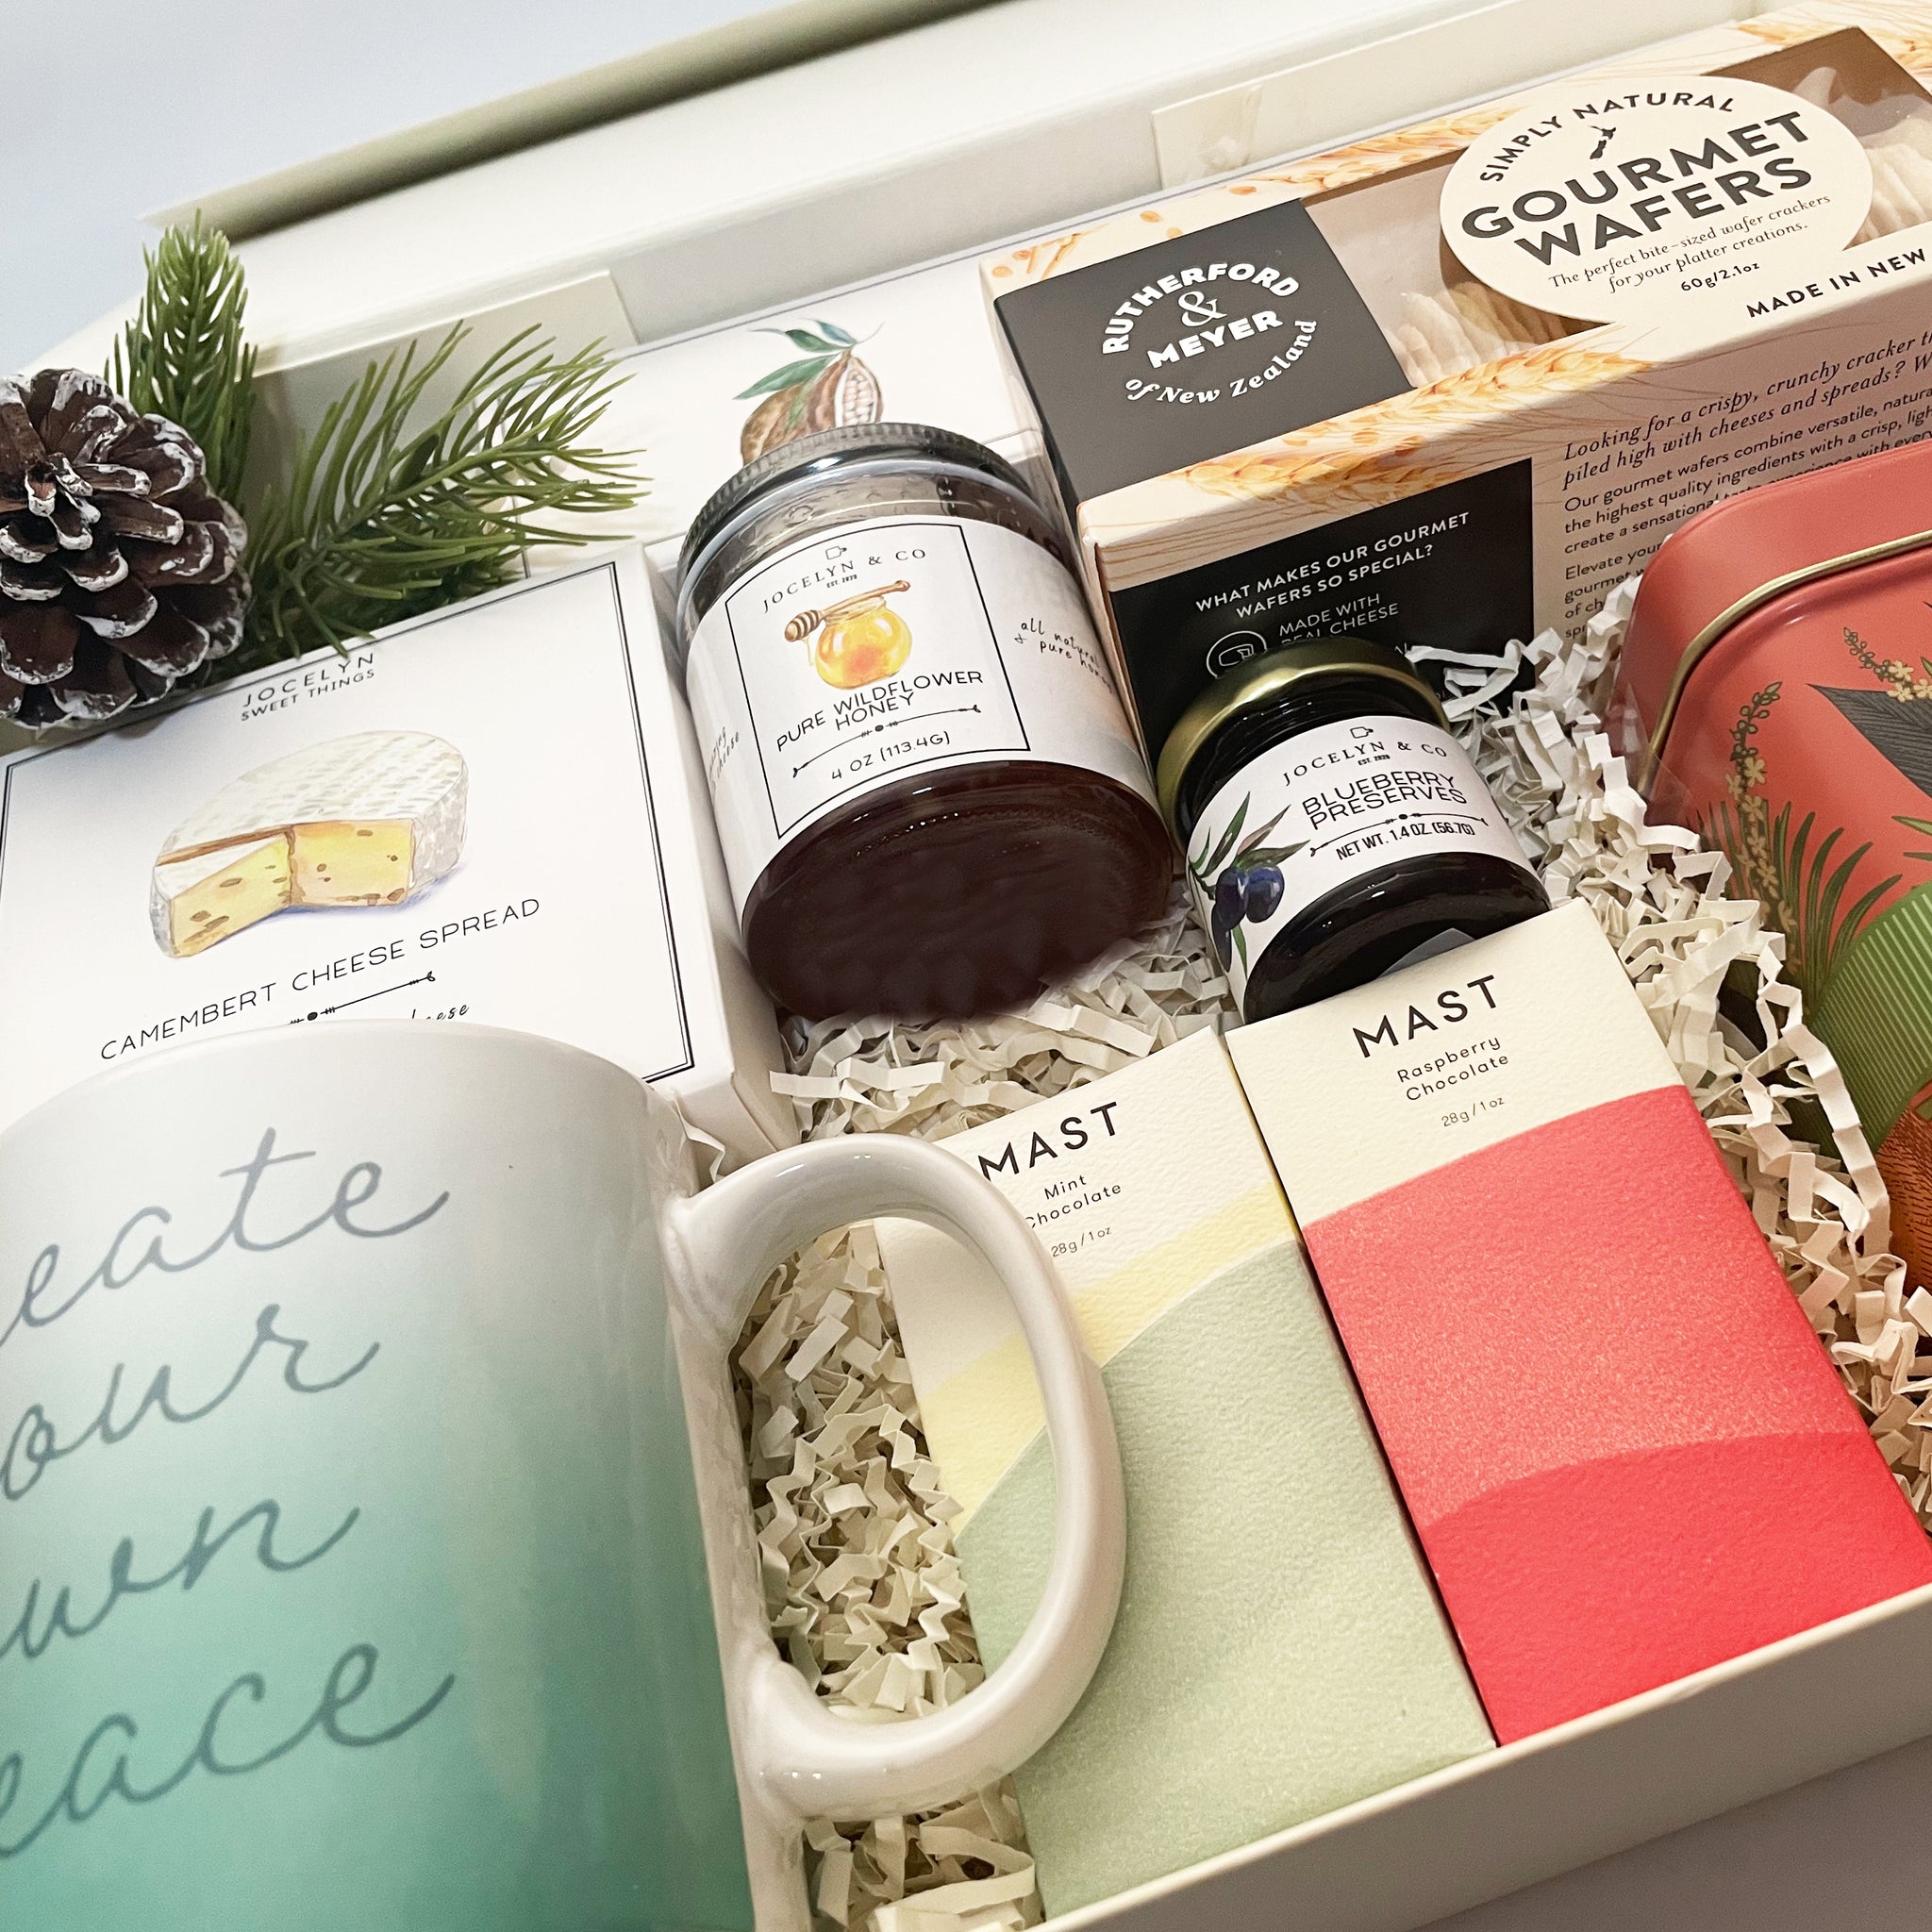 "Very Thankful" Holiday Gift Box - Benzie Gifts